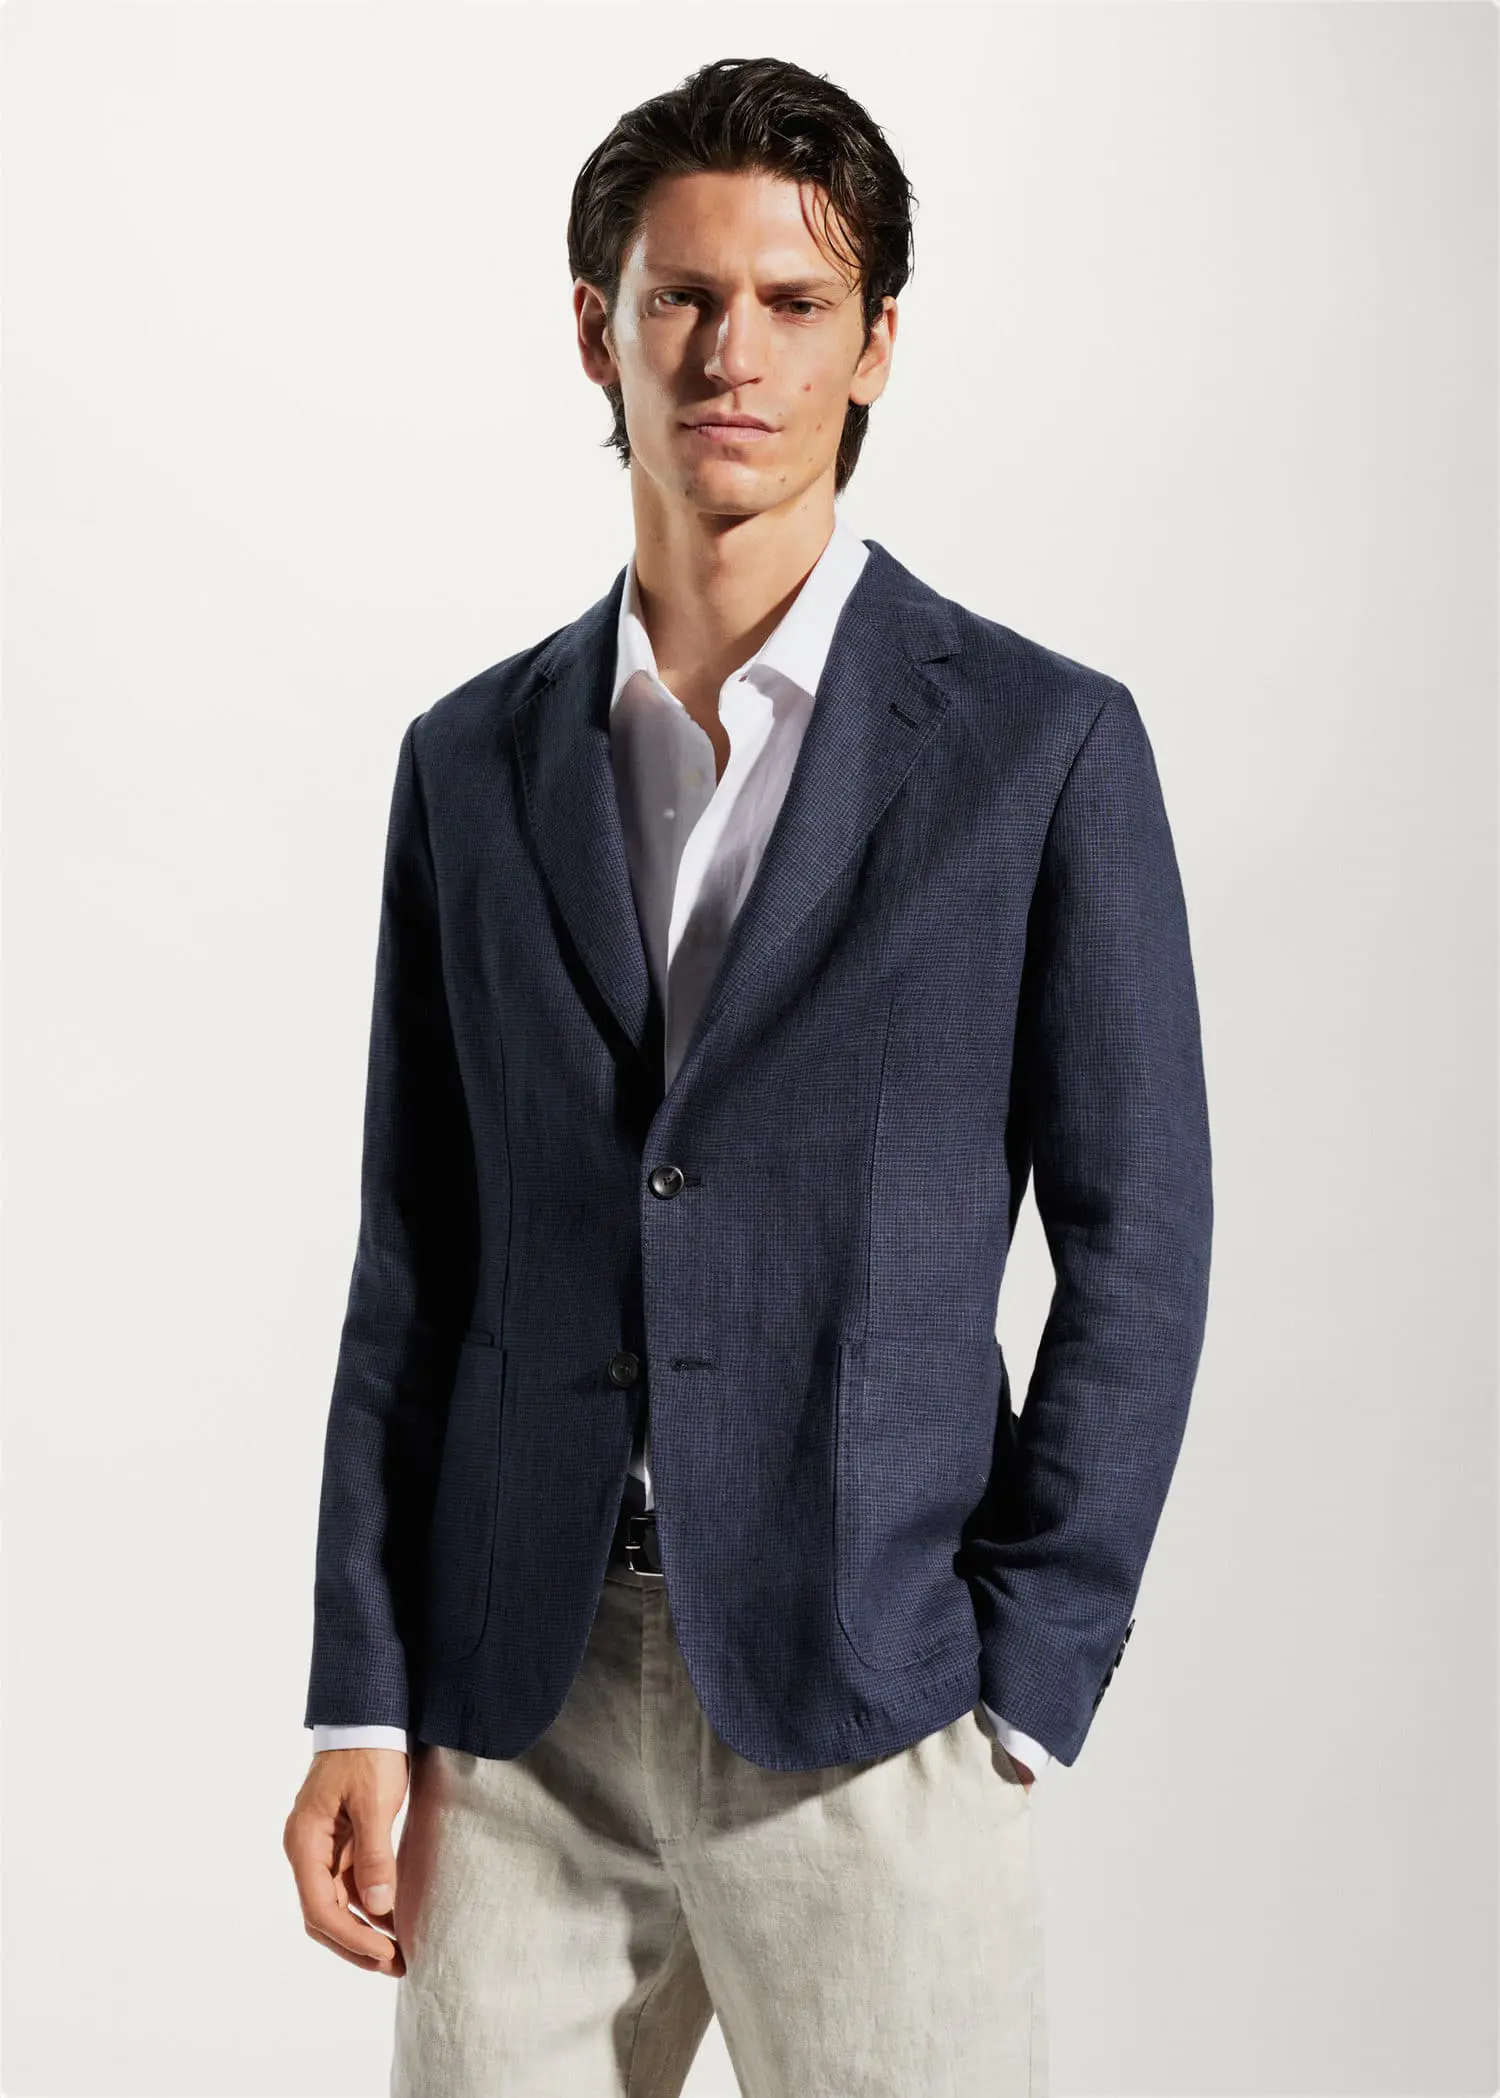 Mango 100% linen micro-houndstooth jacket. a man wearing a suit and a white shirt. 